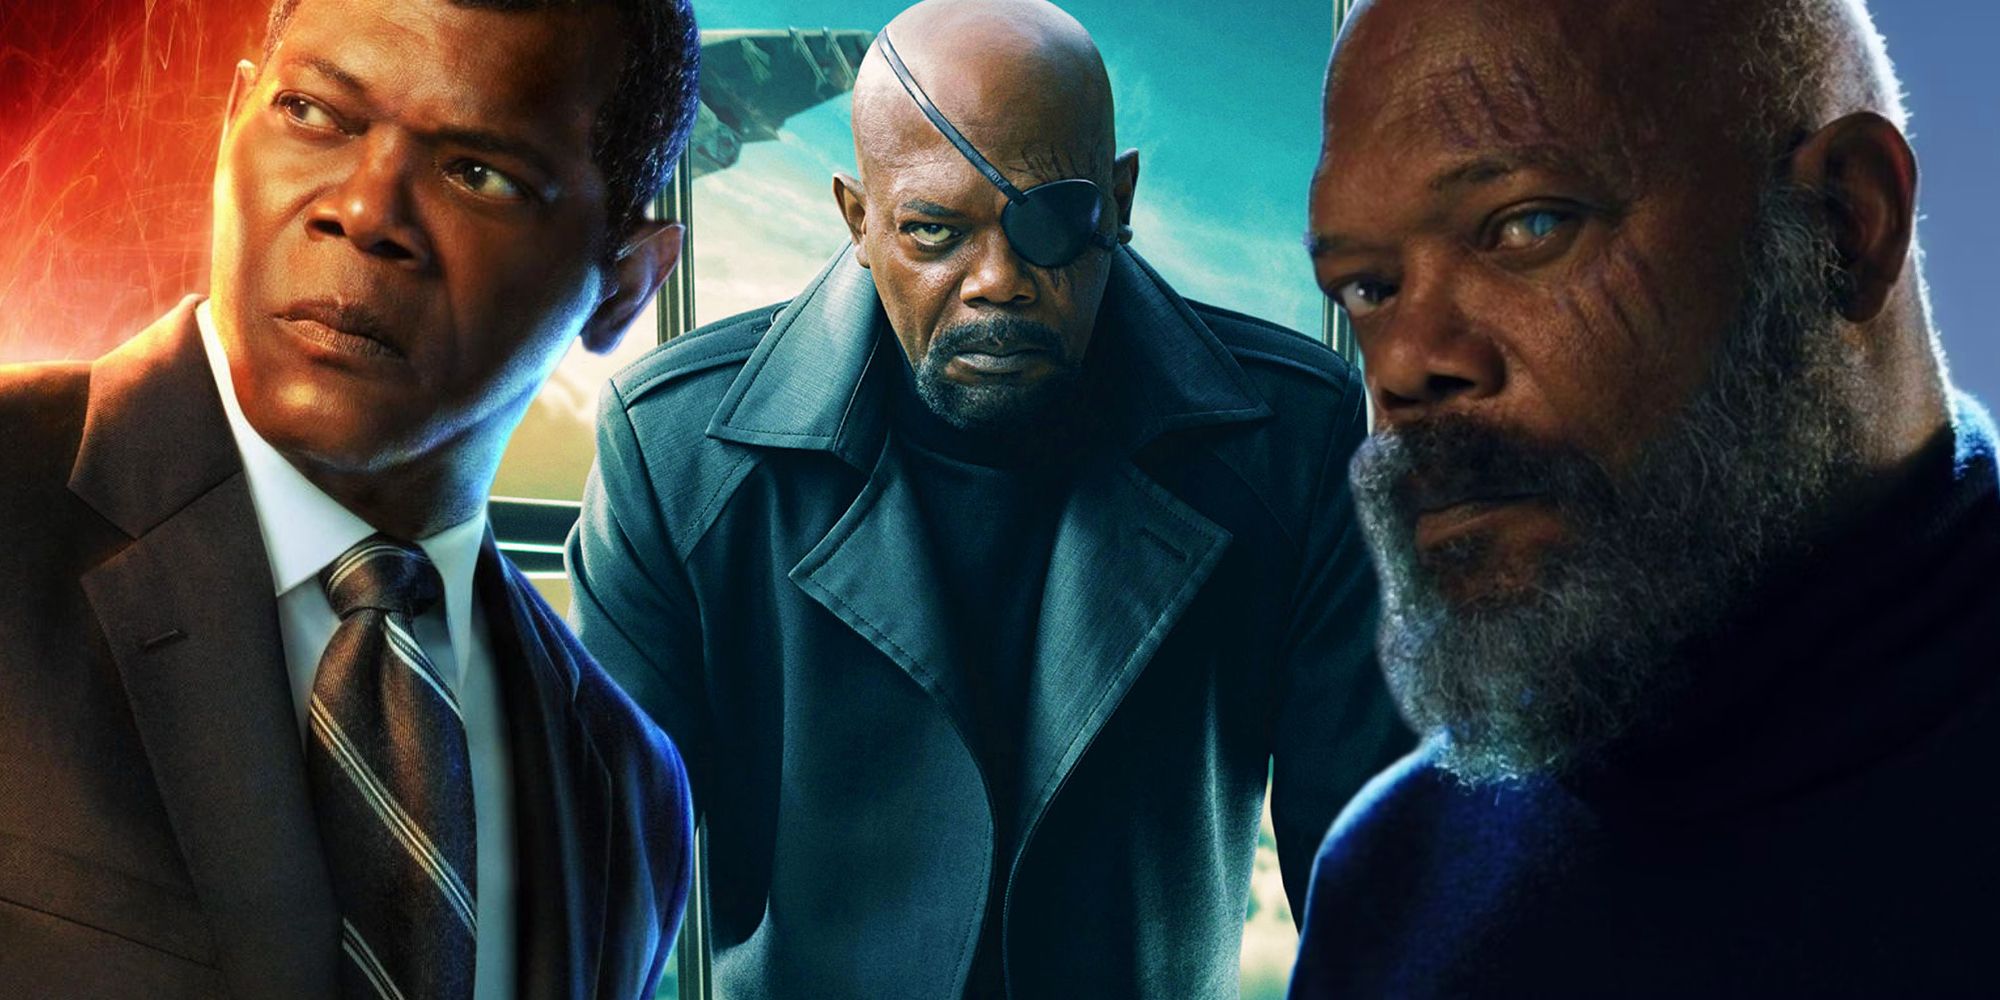 Nick Fury as seen in Captain America: The Winter Soldier between his appearance in Secret Invasion and Captain Marvel